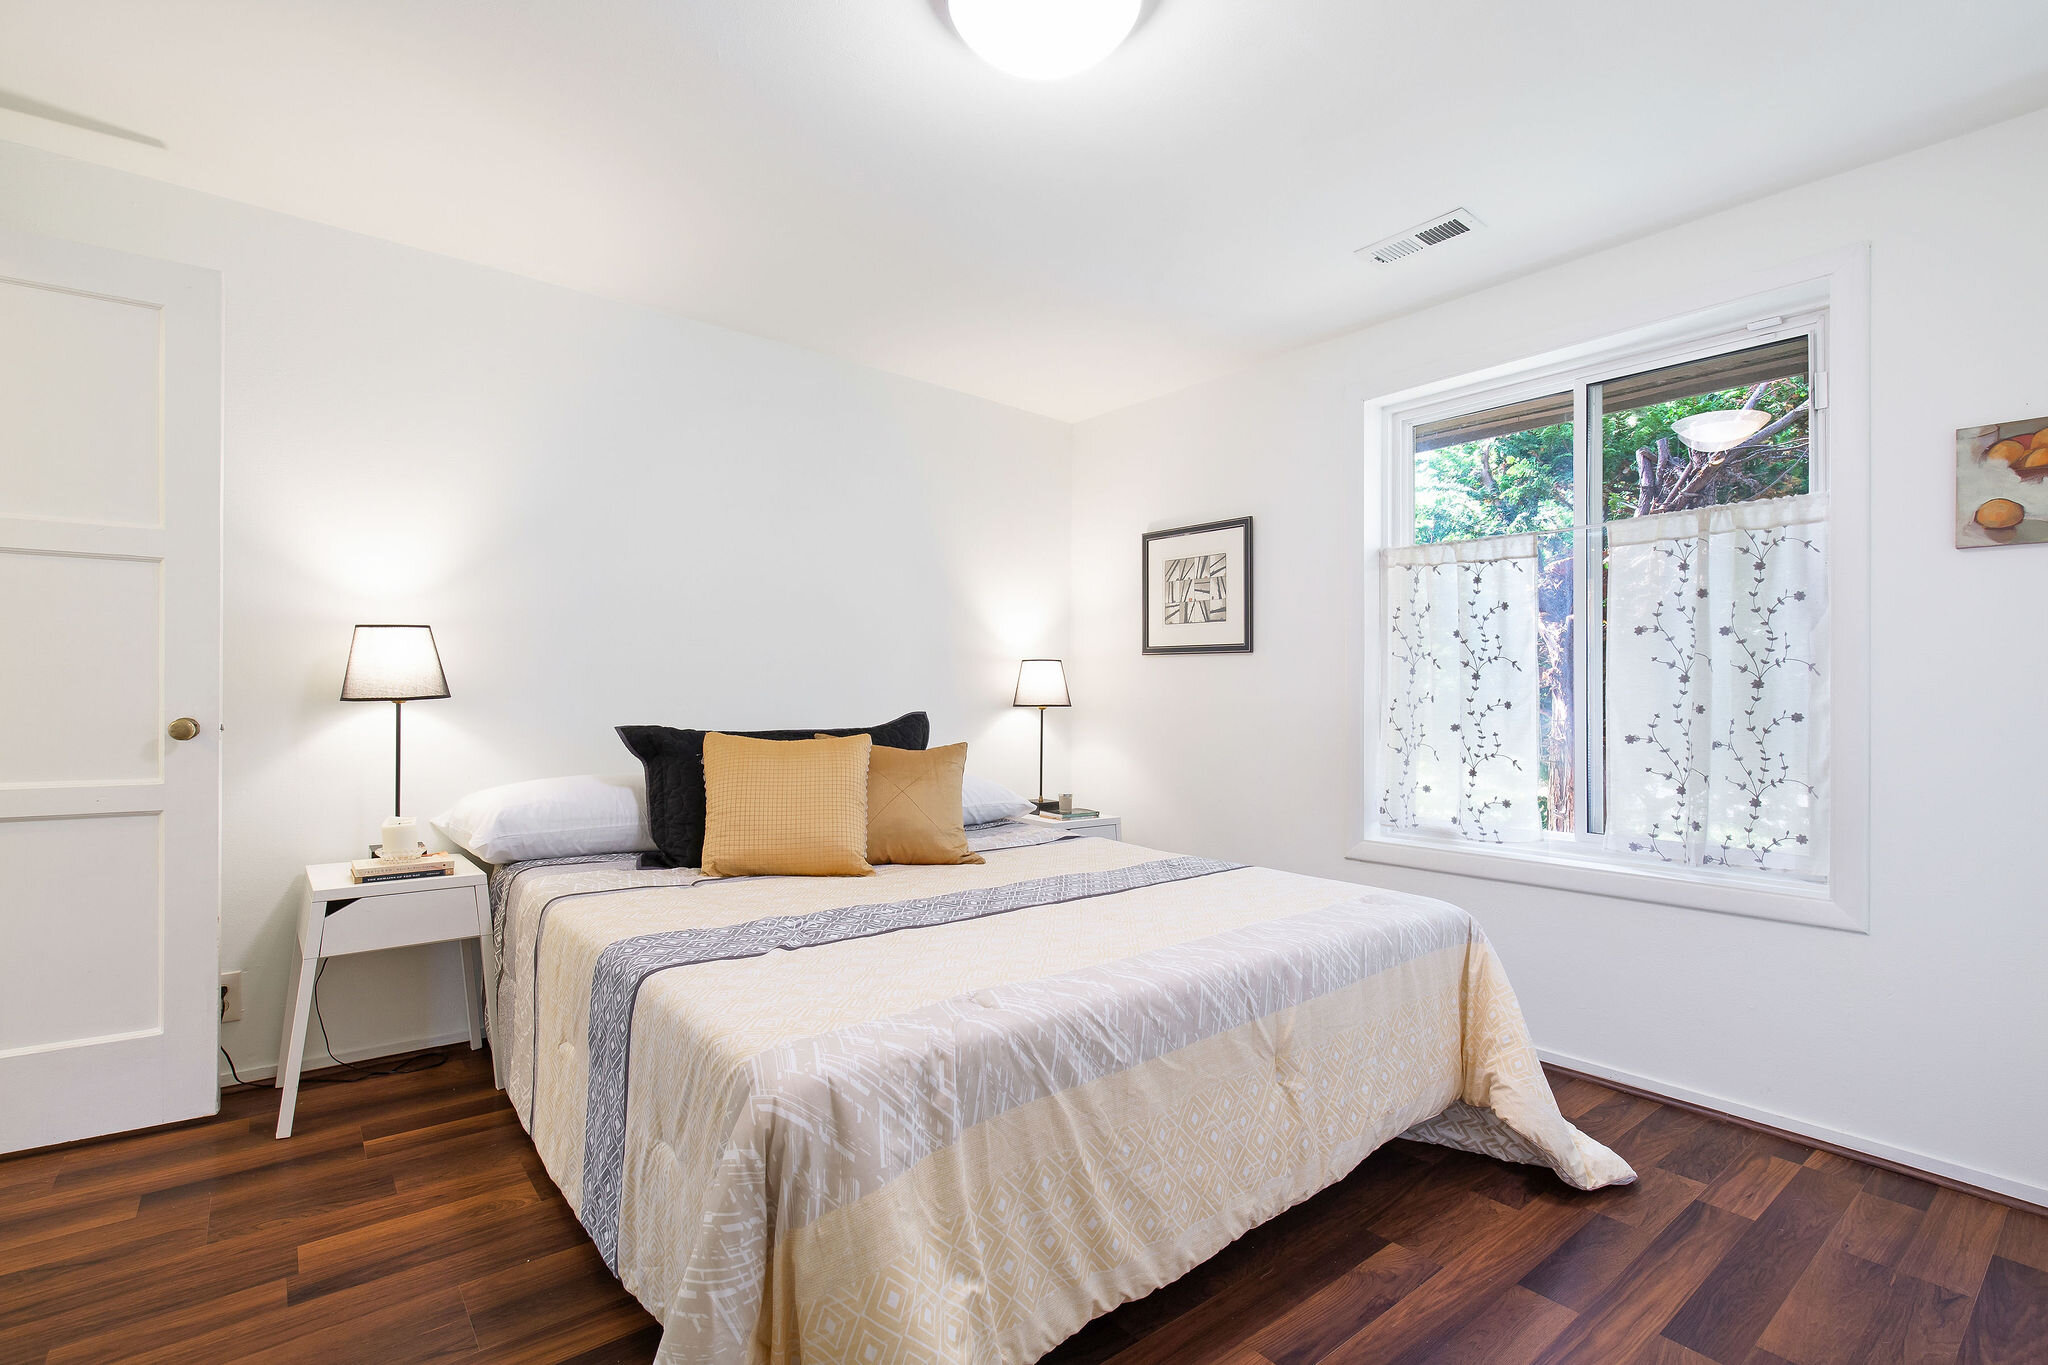  There are vinyl windows throughout the house and new light fixtures in this bedroom.   